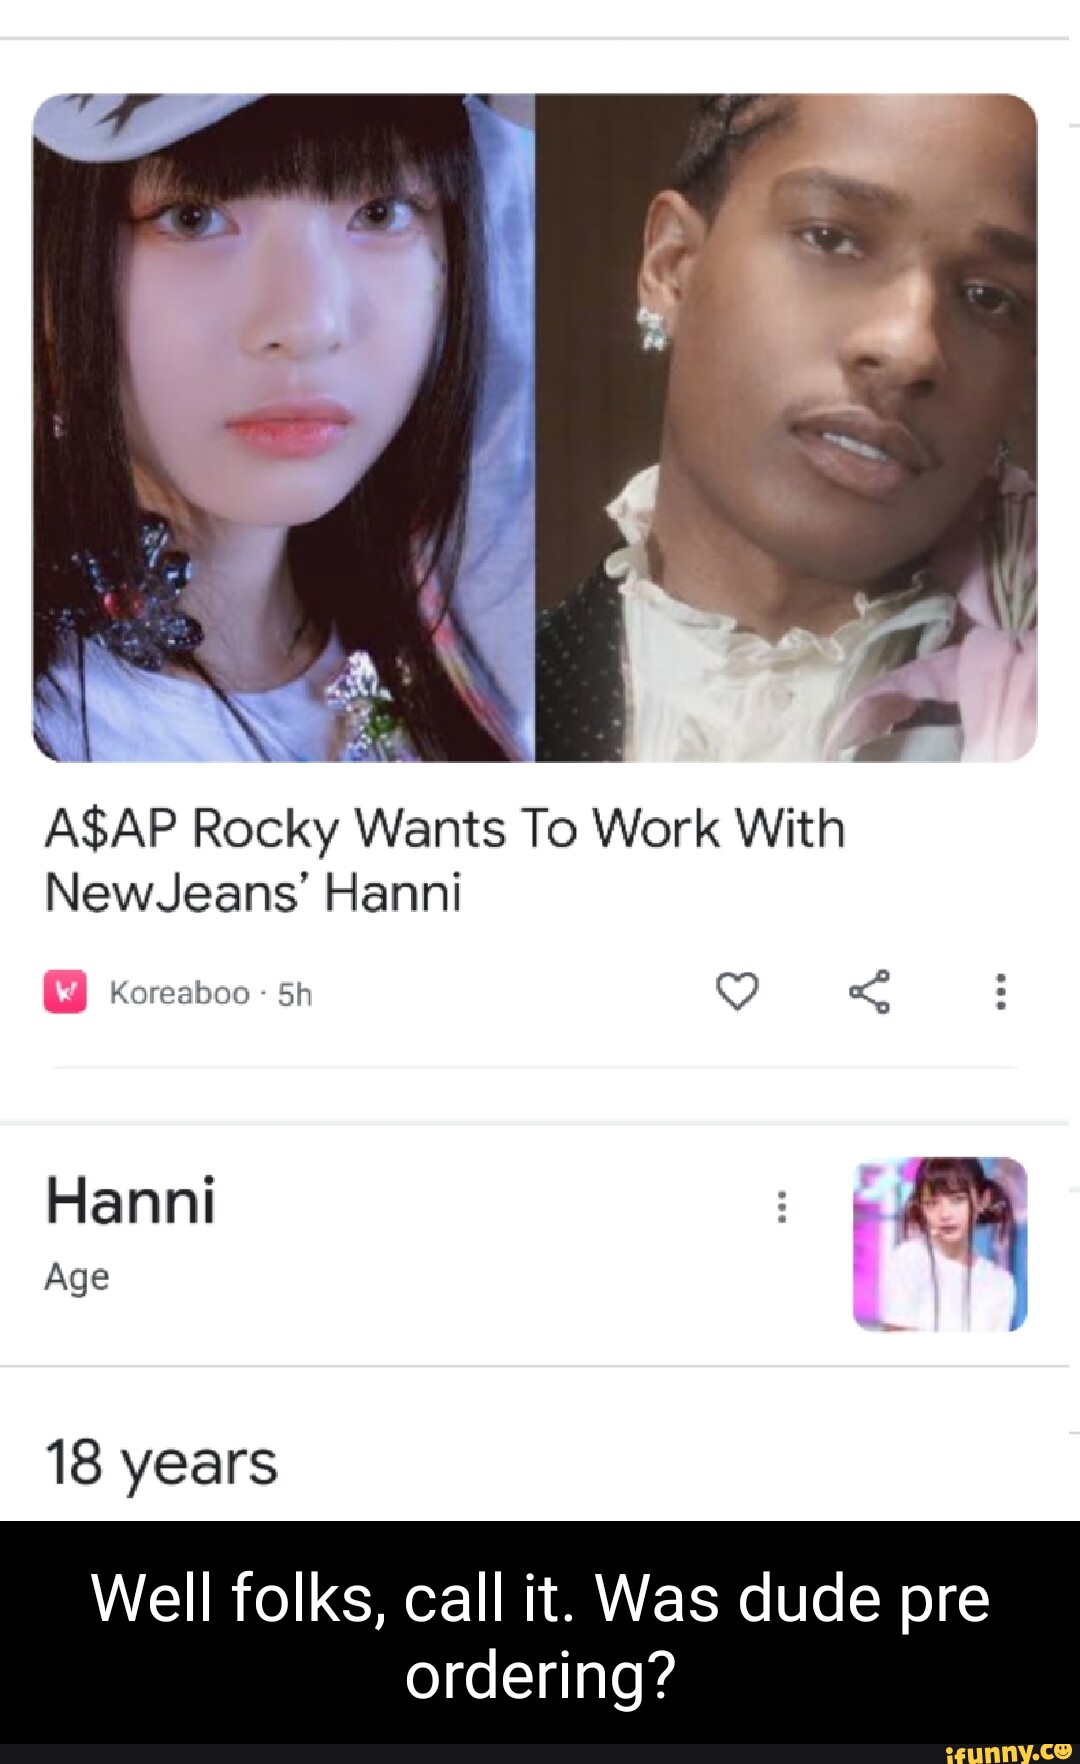 ASAP Rocky wishes to work with New Jeans member Hanni